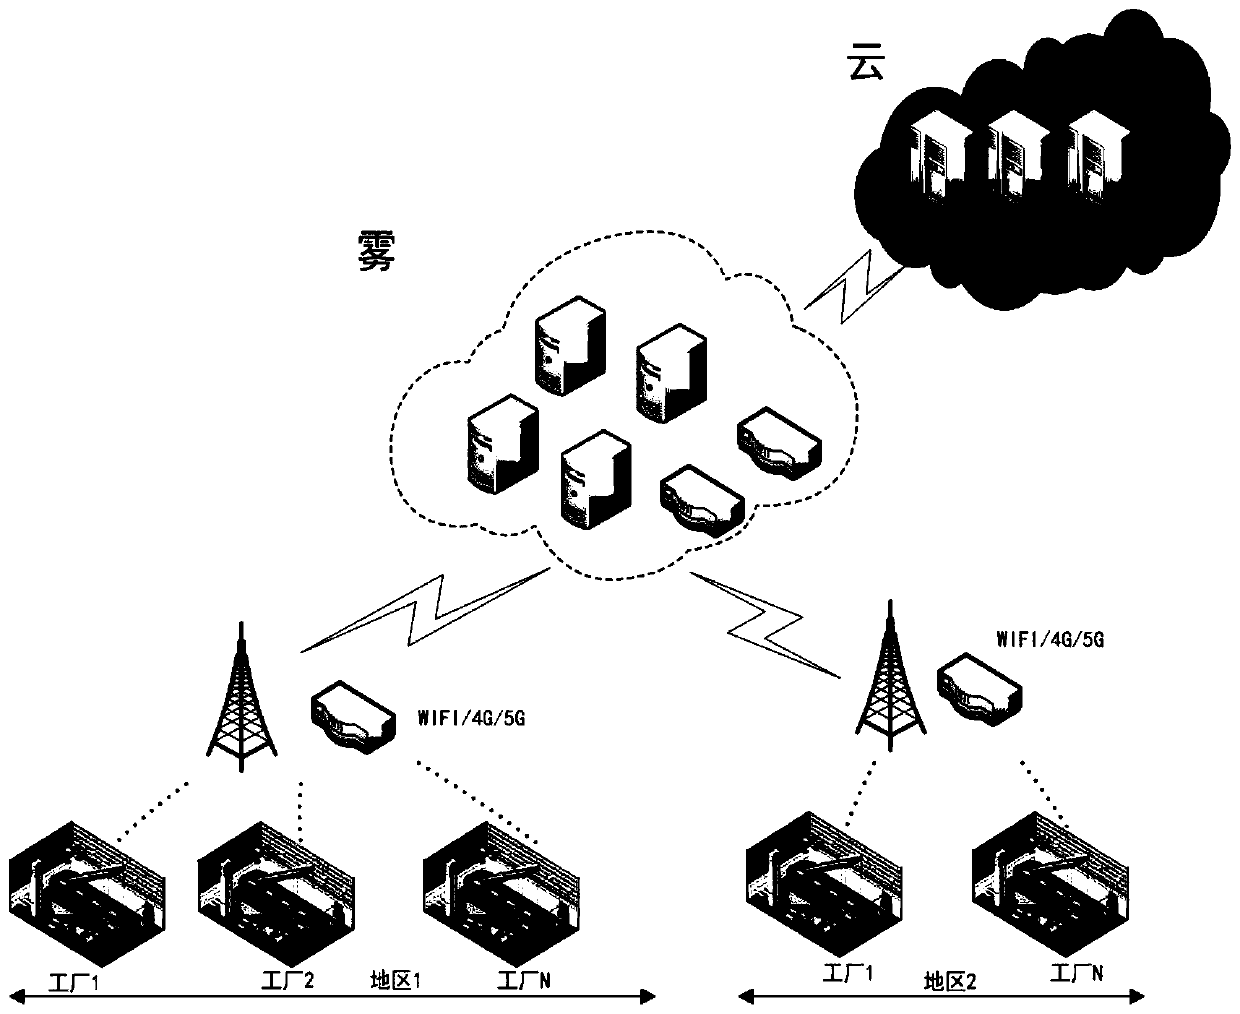 Industrial internet sensitive data protection method based on cloud and mist collaboration